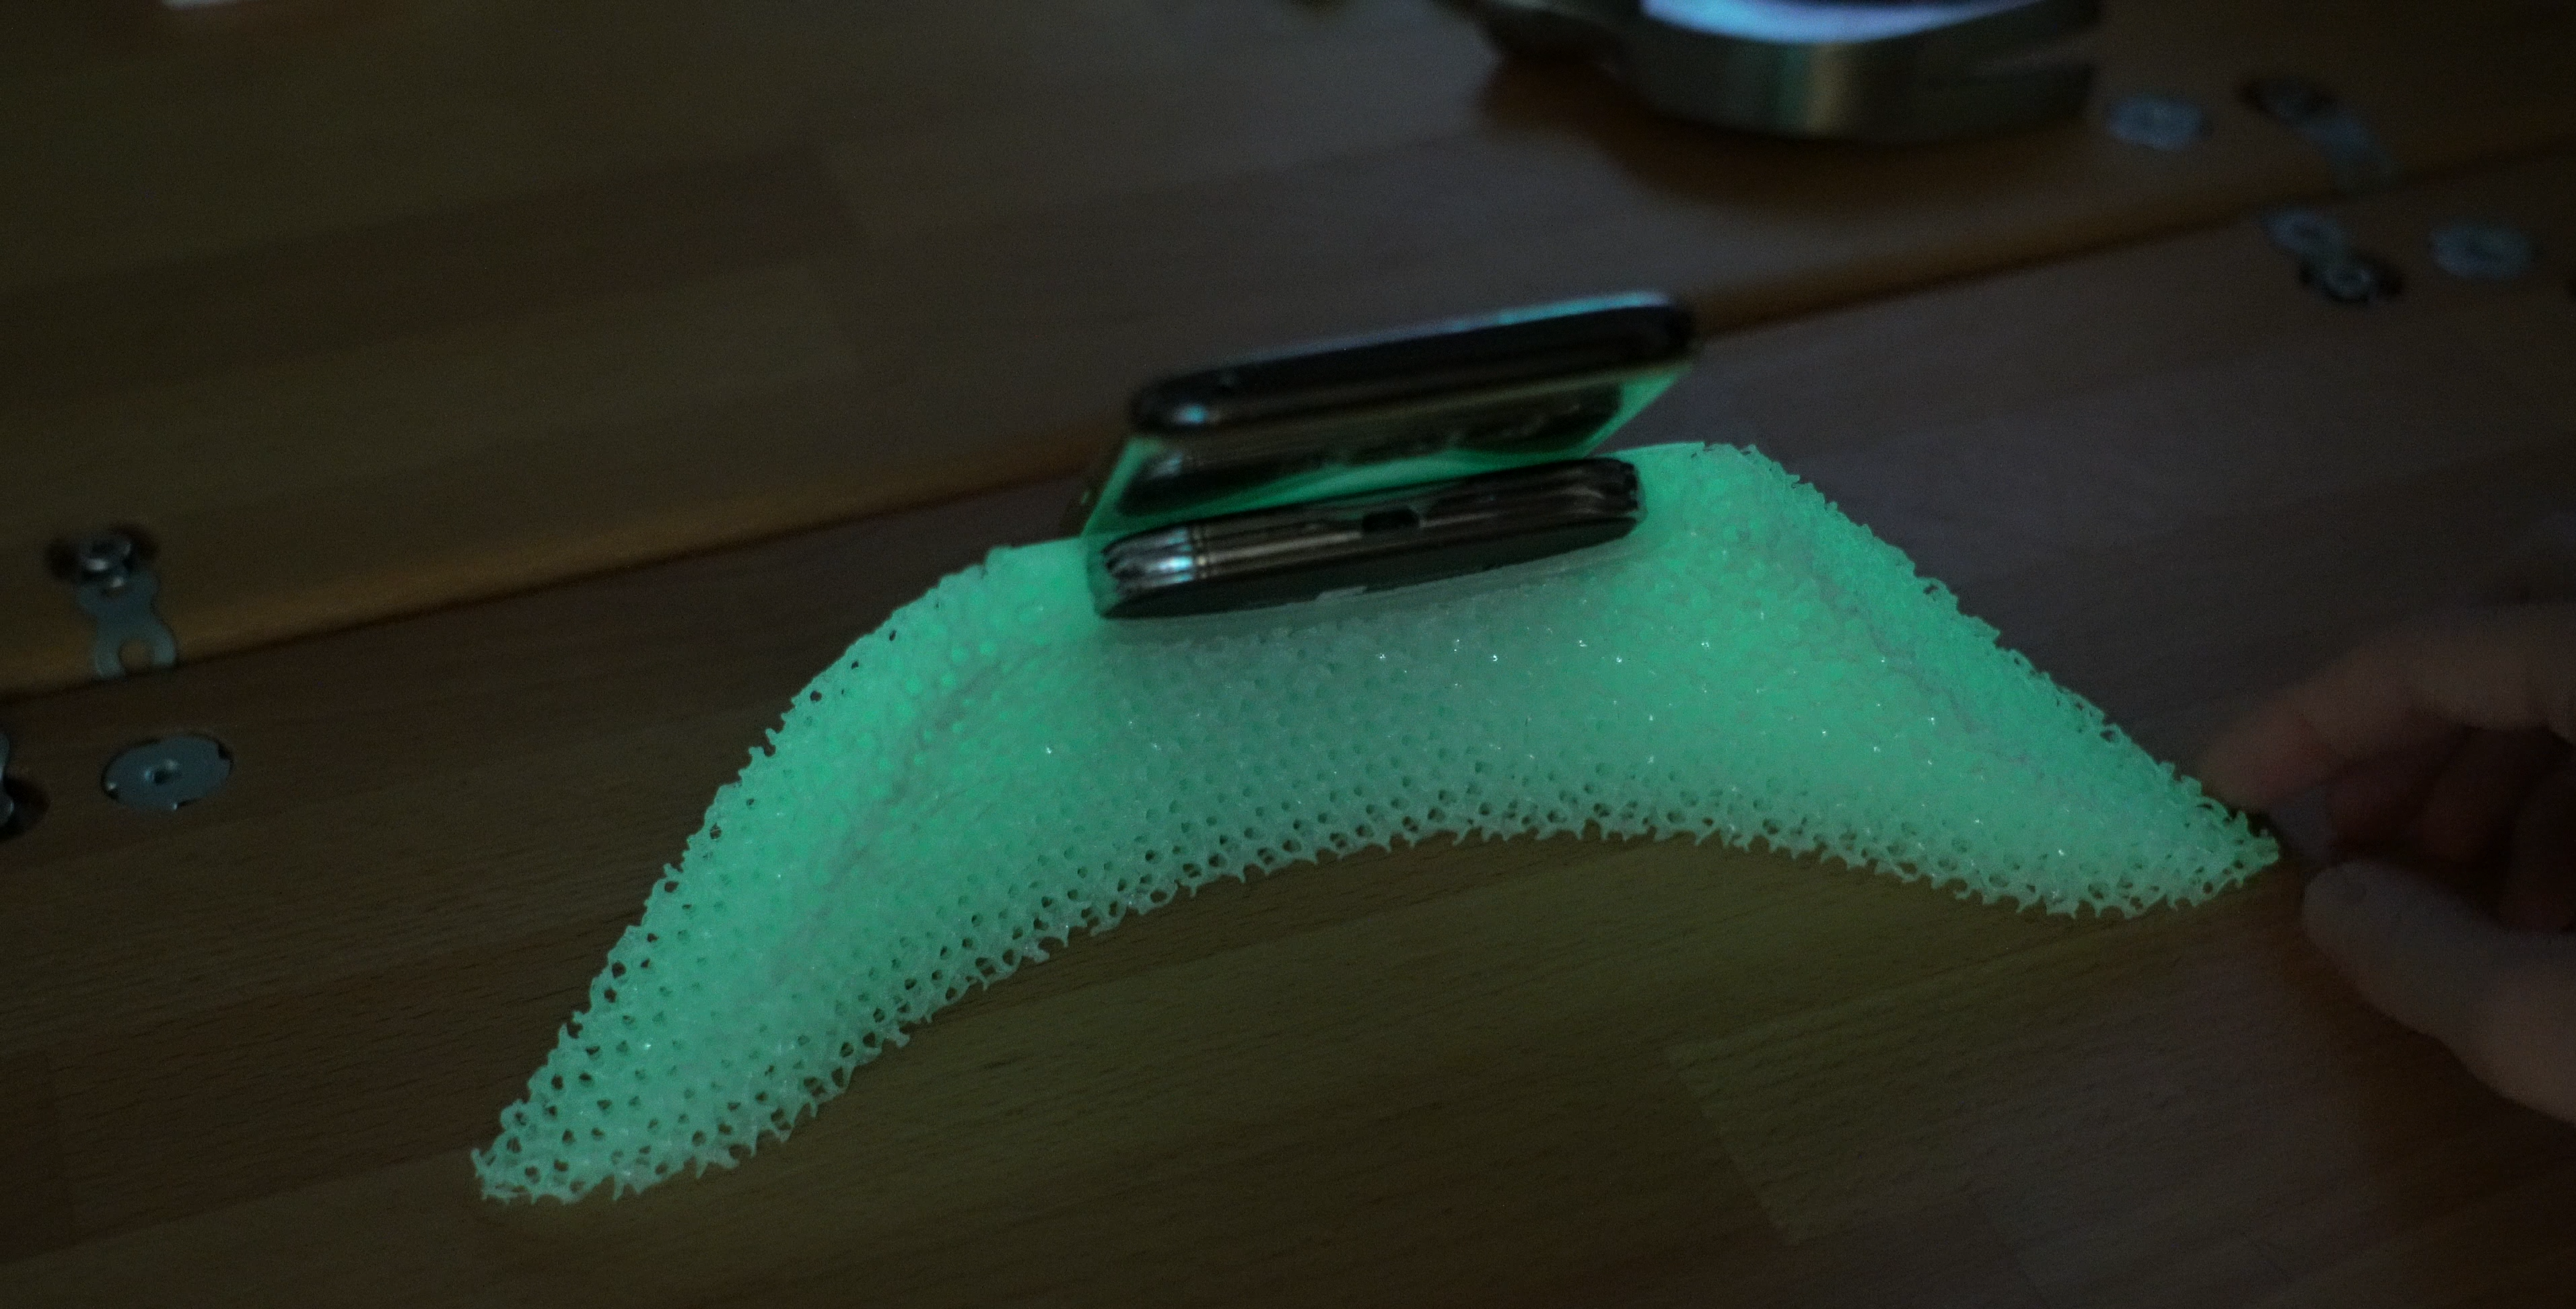 Qi charger desk stand/placement aid that glows in the dark